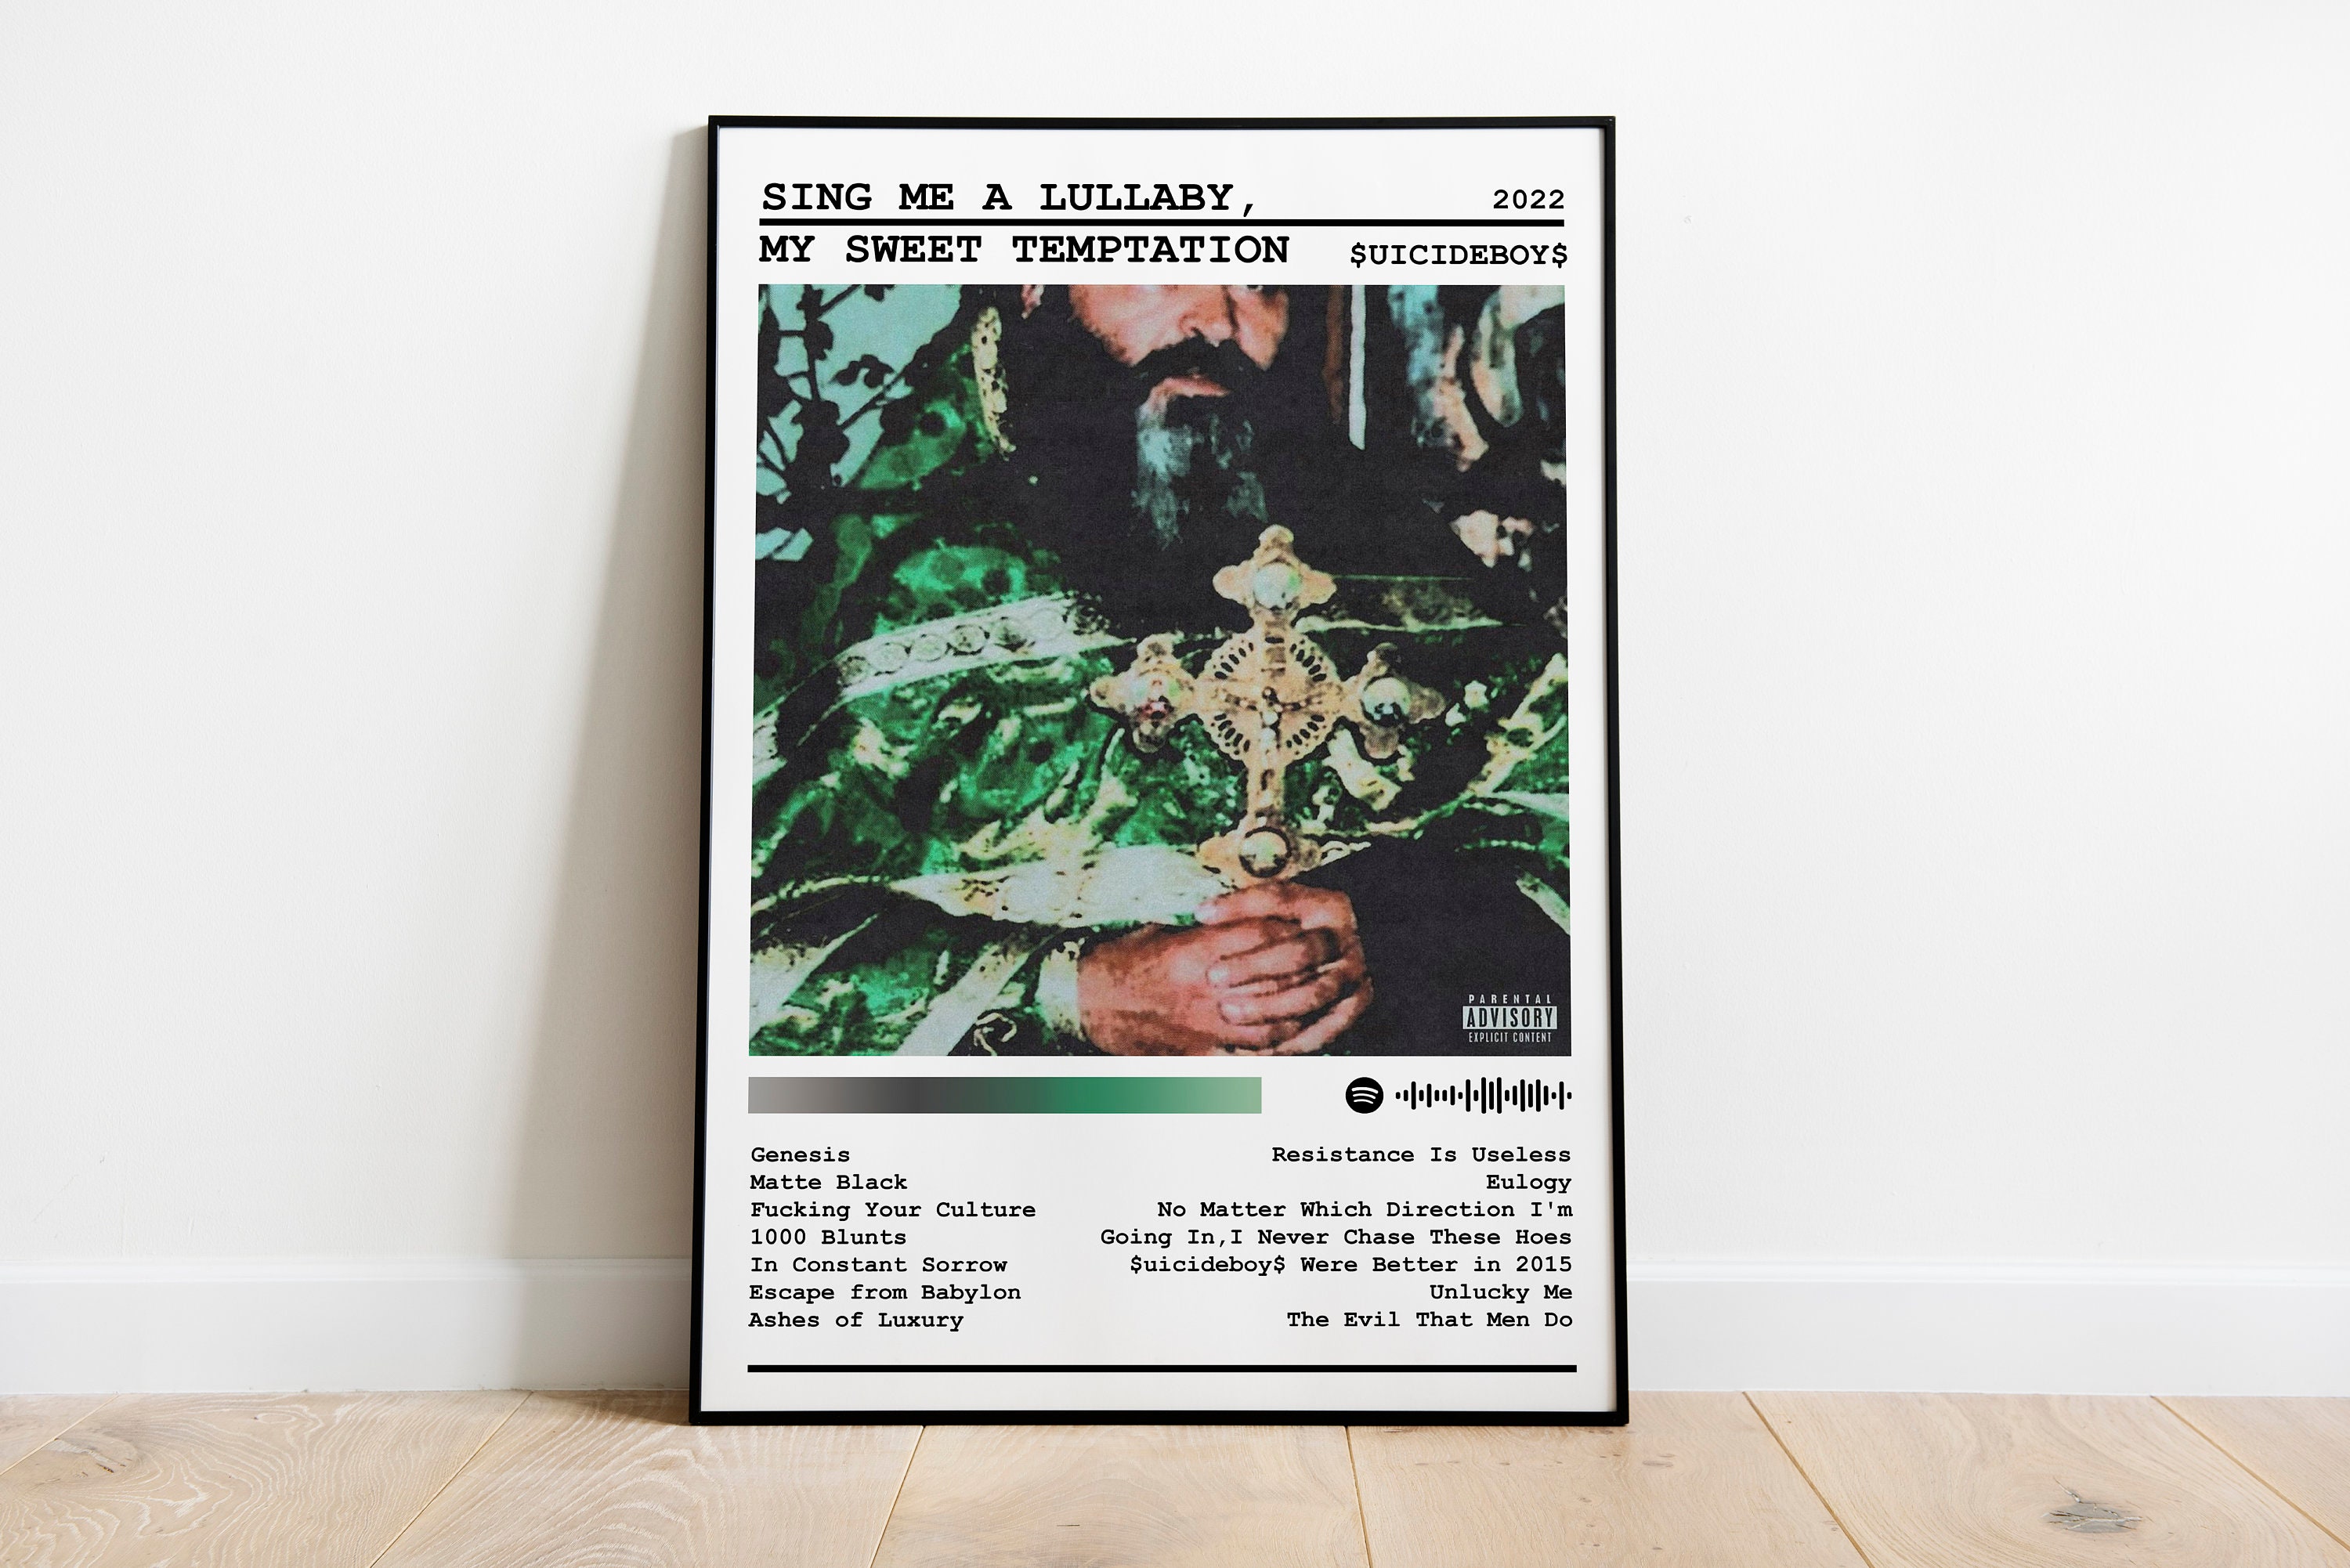 Suicideboys album covers Art Print by OtherWorld00